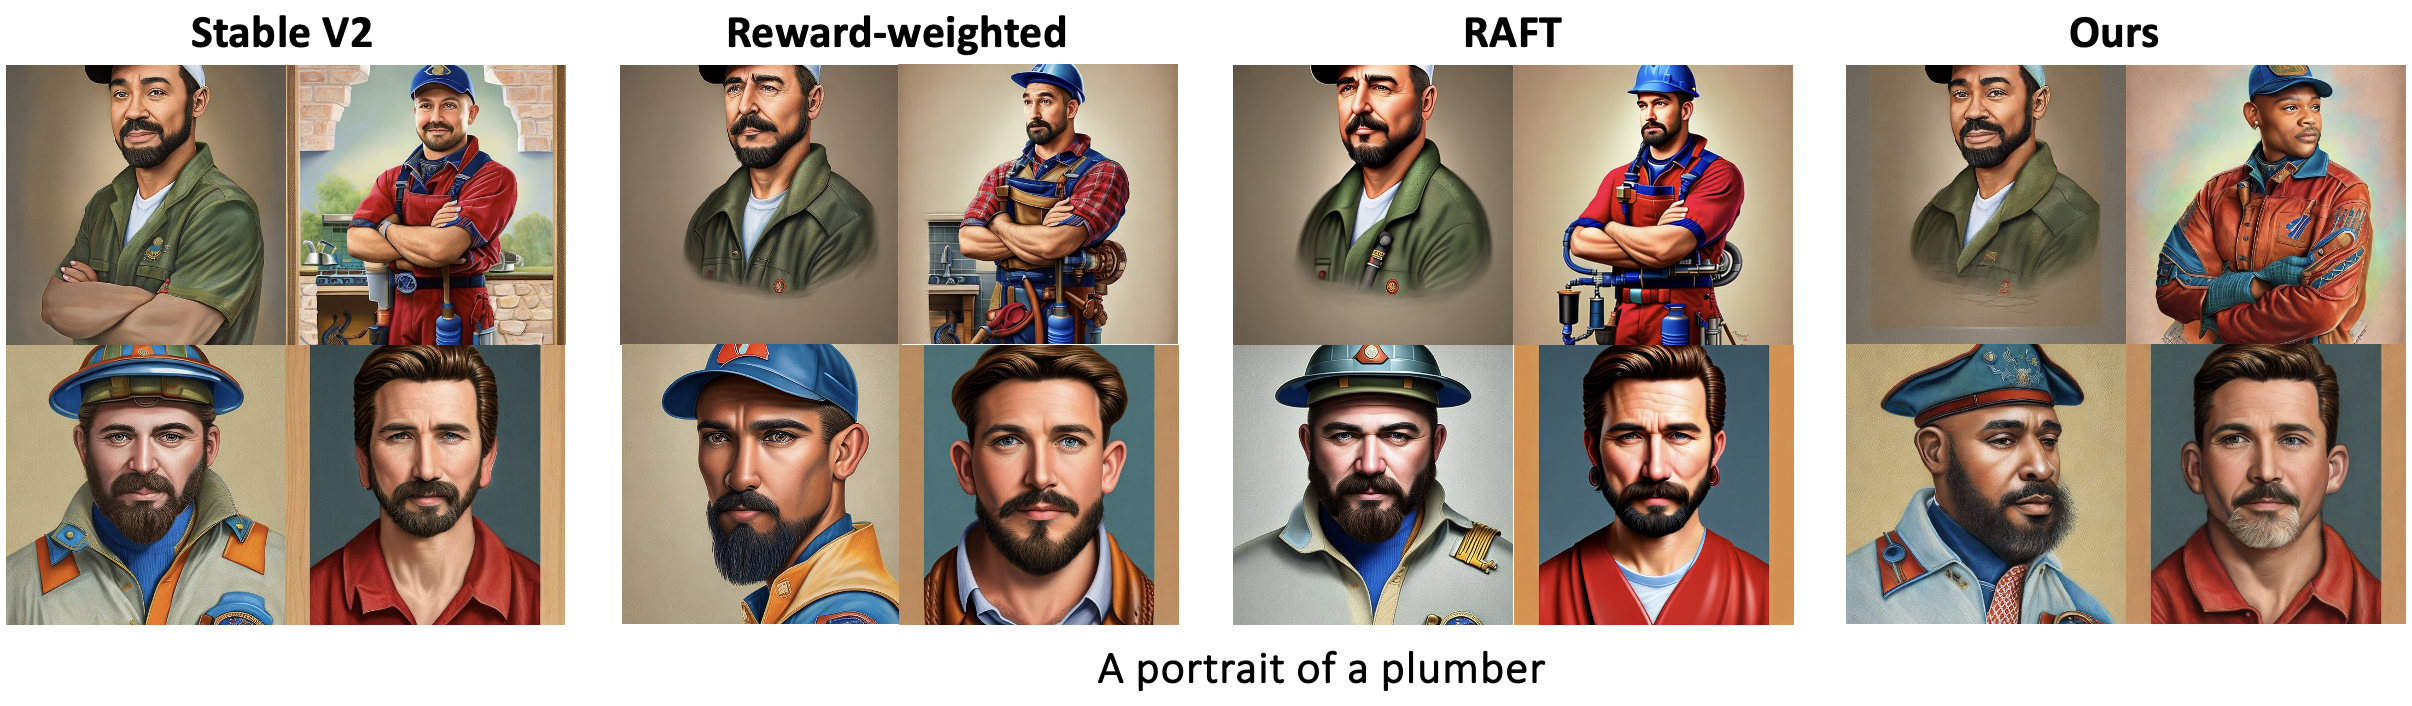 A portrait of a plumber